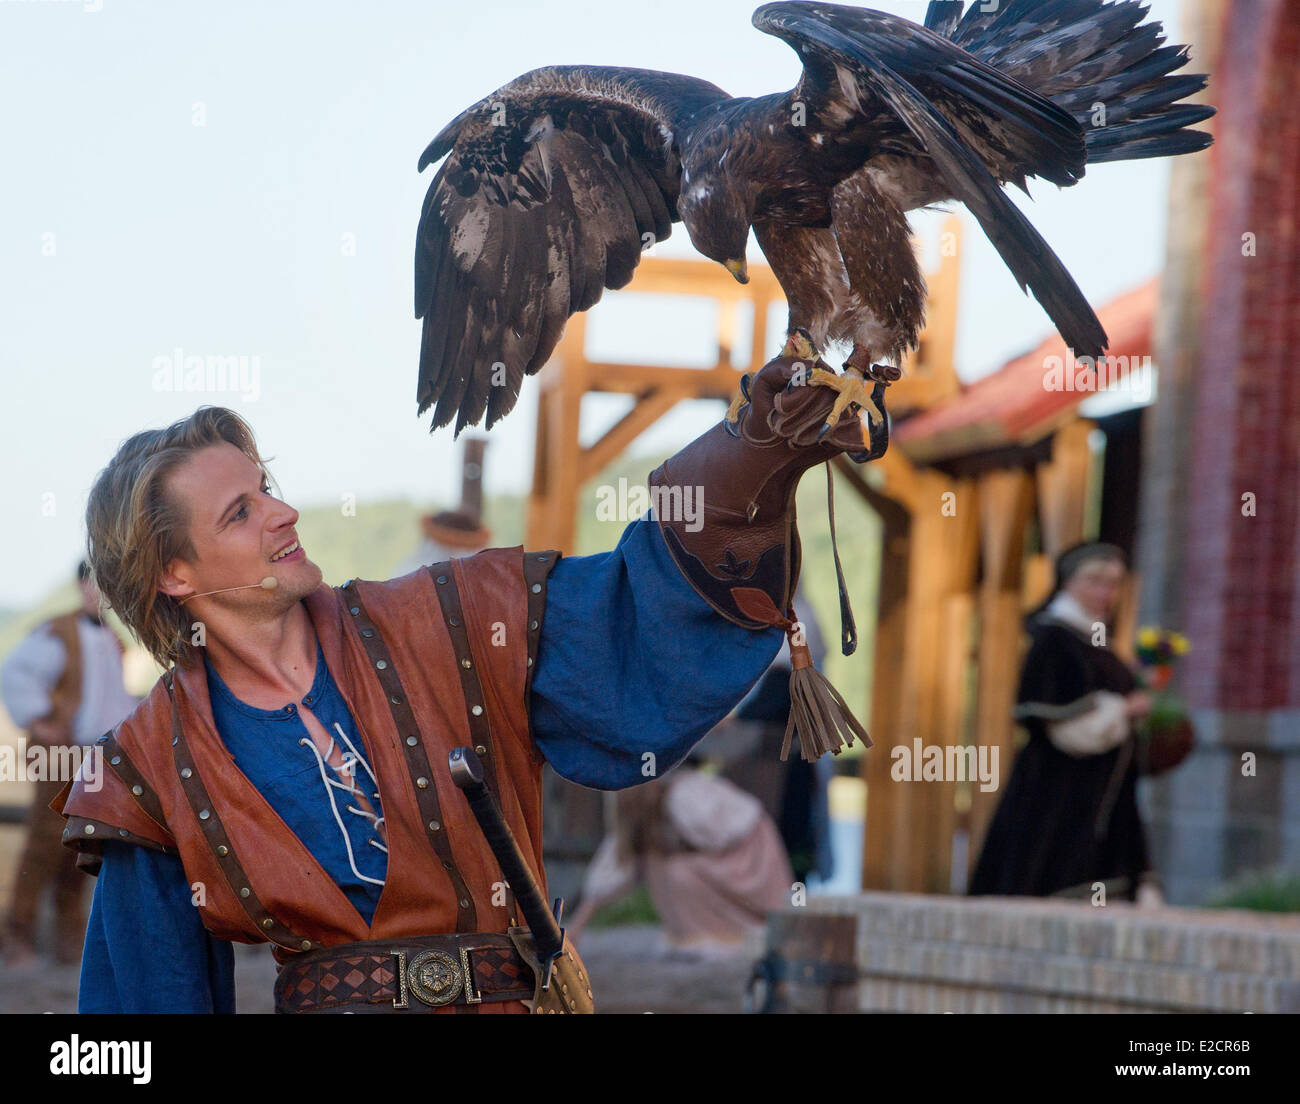 Ruegen, Germany. 18th June, 2014. Actor Bastian Hamm in the role of pirate Klaus Stoertebeker acts with White-tailed eagle Laran during a rehearsal at open-air stage Naturbuehne Ralswiek on Ruegen, Germany, 18 June 2014. The 22nd Stoertebeker Festival starts on 21 June 2014 with the piece 'God's Friend'. The festival counted 340,000 visitors the year before. Photo: STEFAN SAUER /DPA/Alamy Live News Stock Photo